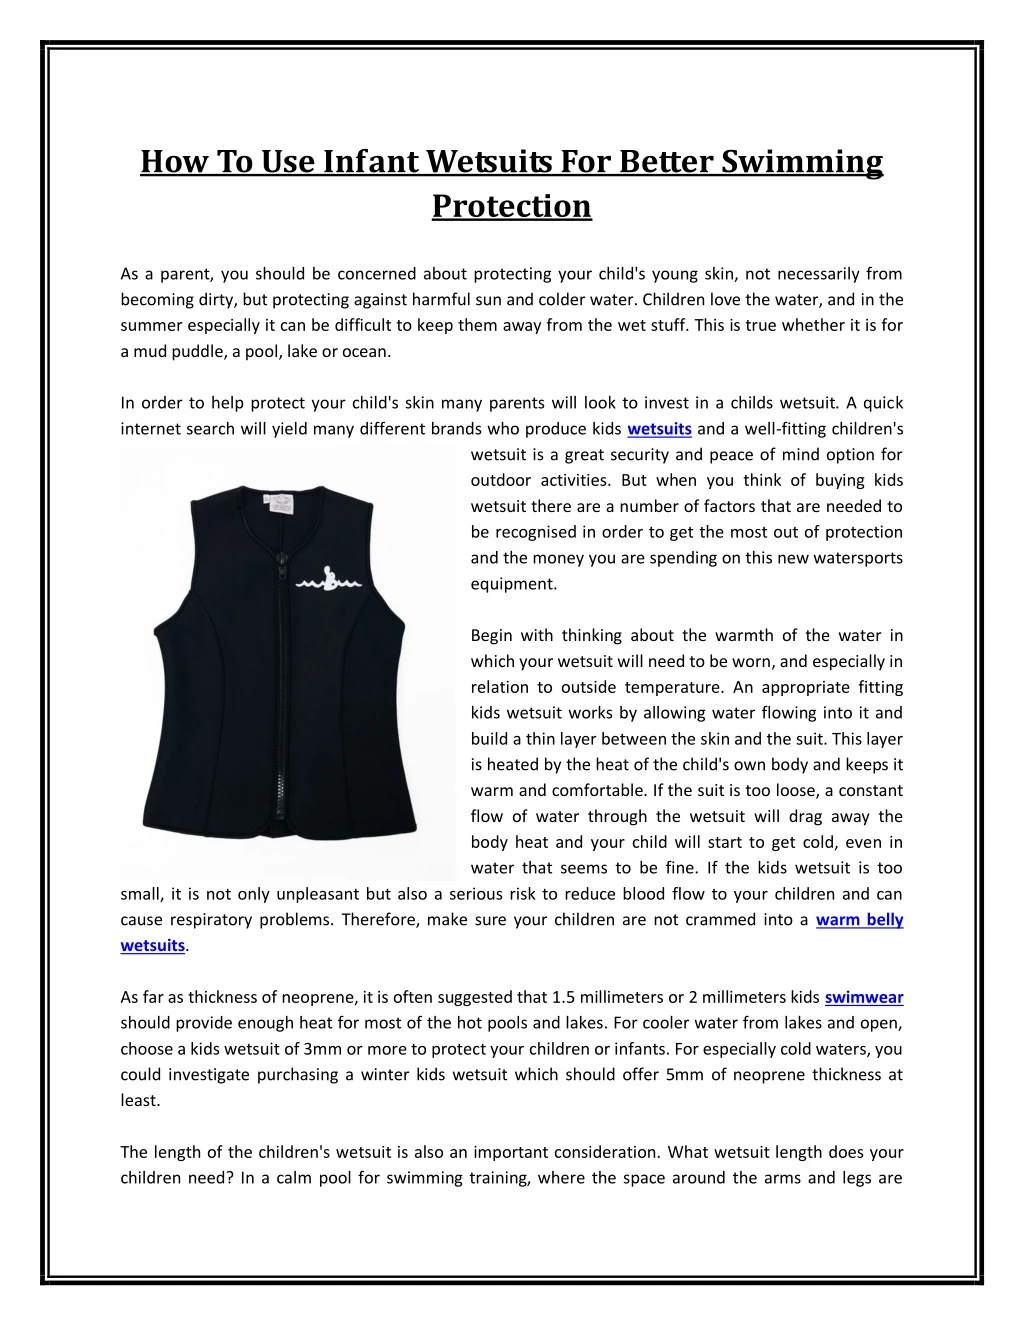 how to use infant wetsuits for better swimming